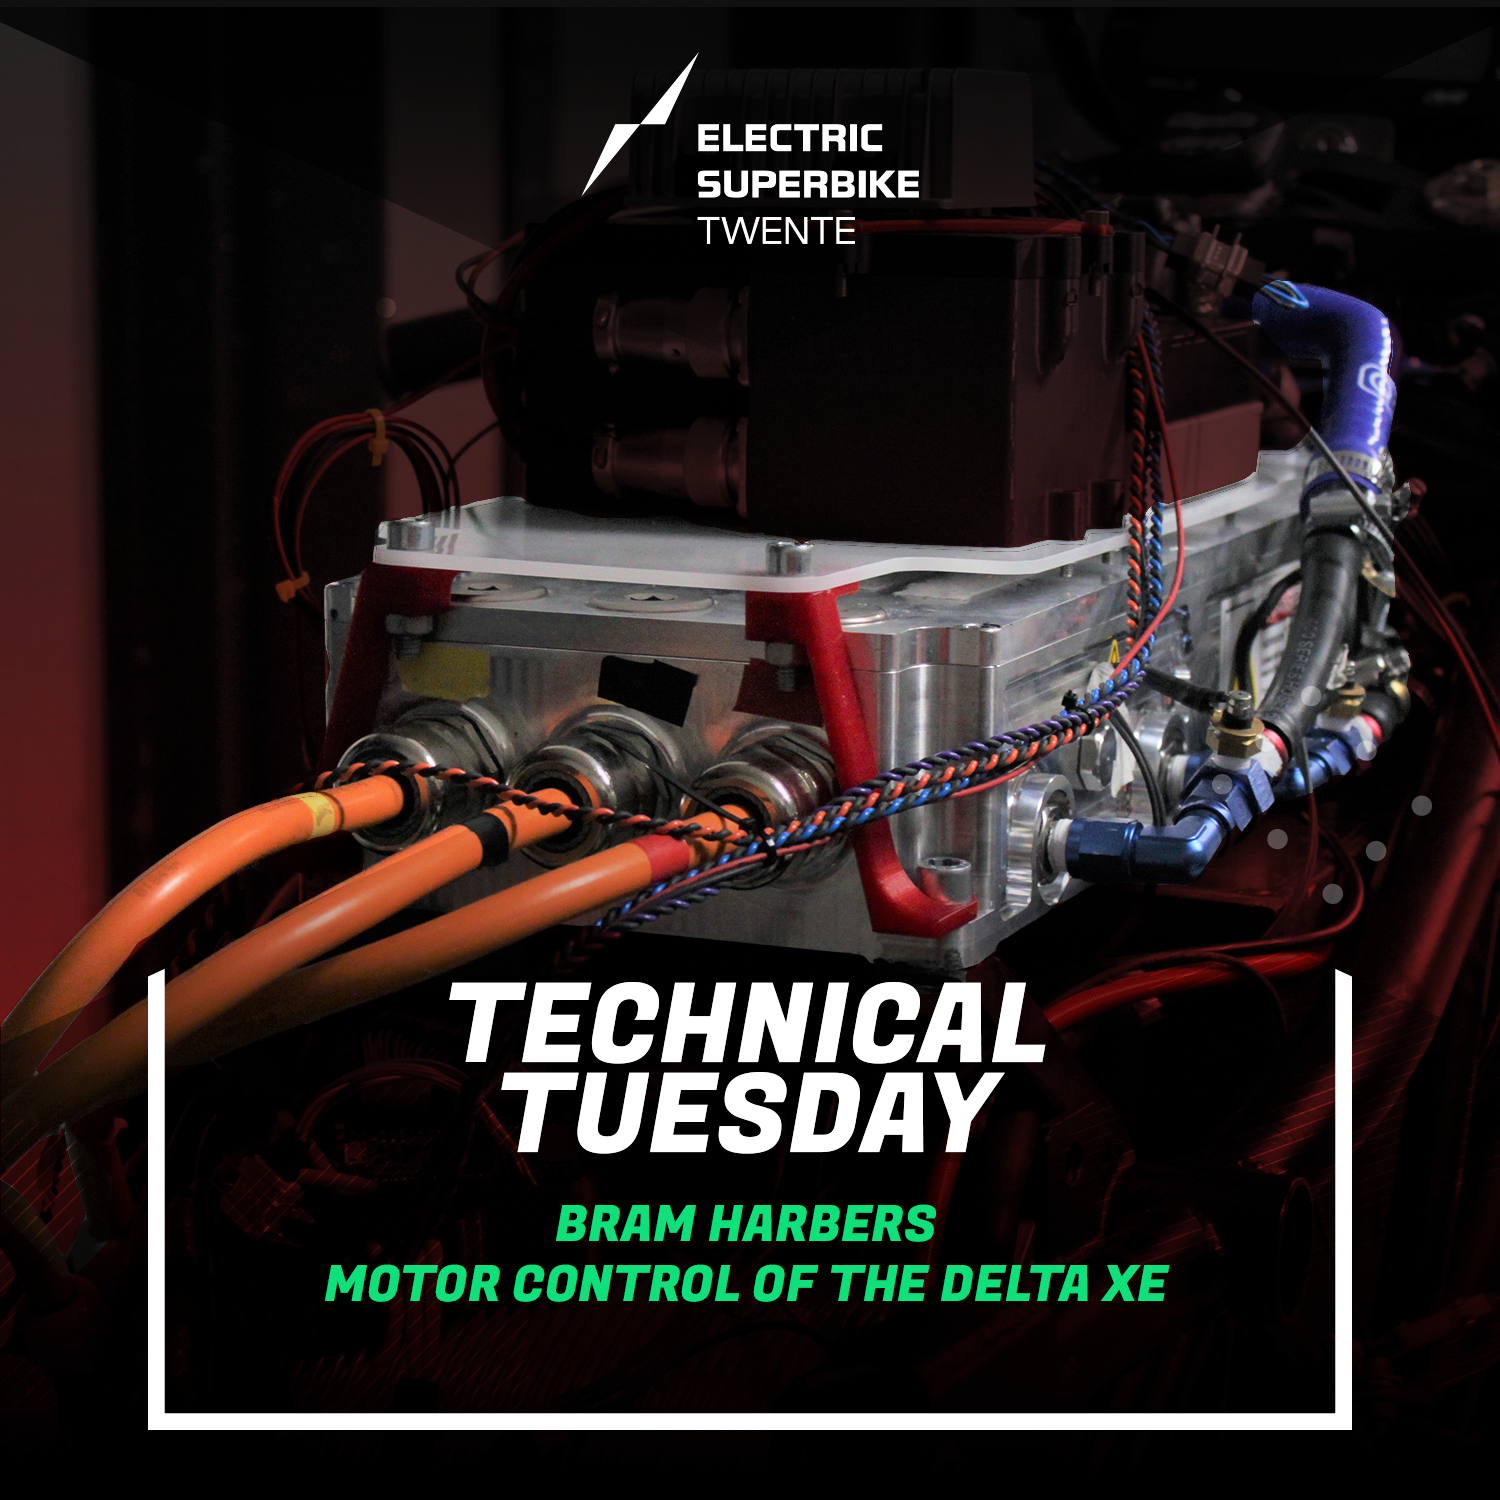 Technical Tuesday: Motor Control of the Delta XE